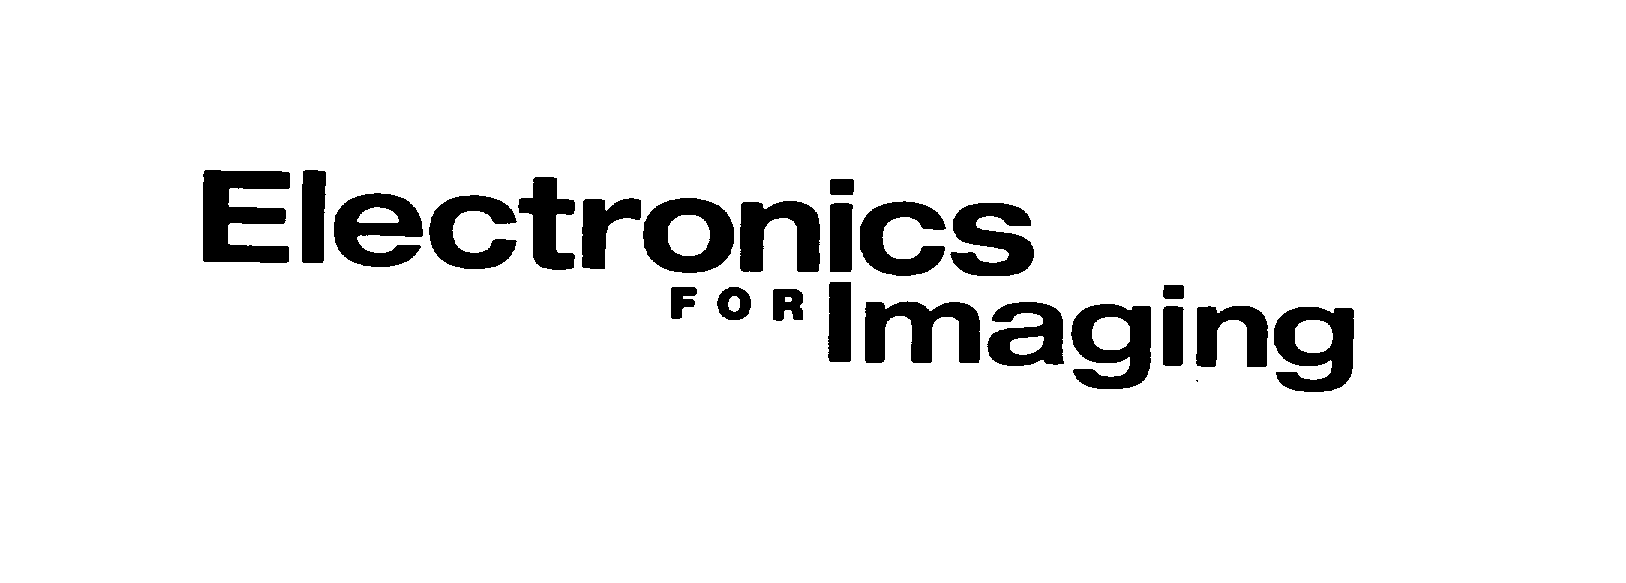  ELECTRONICS FOR IMAGING